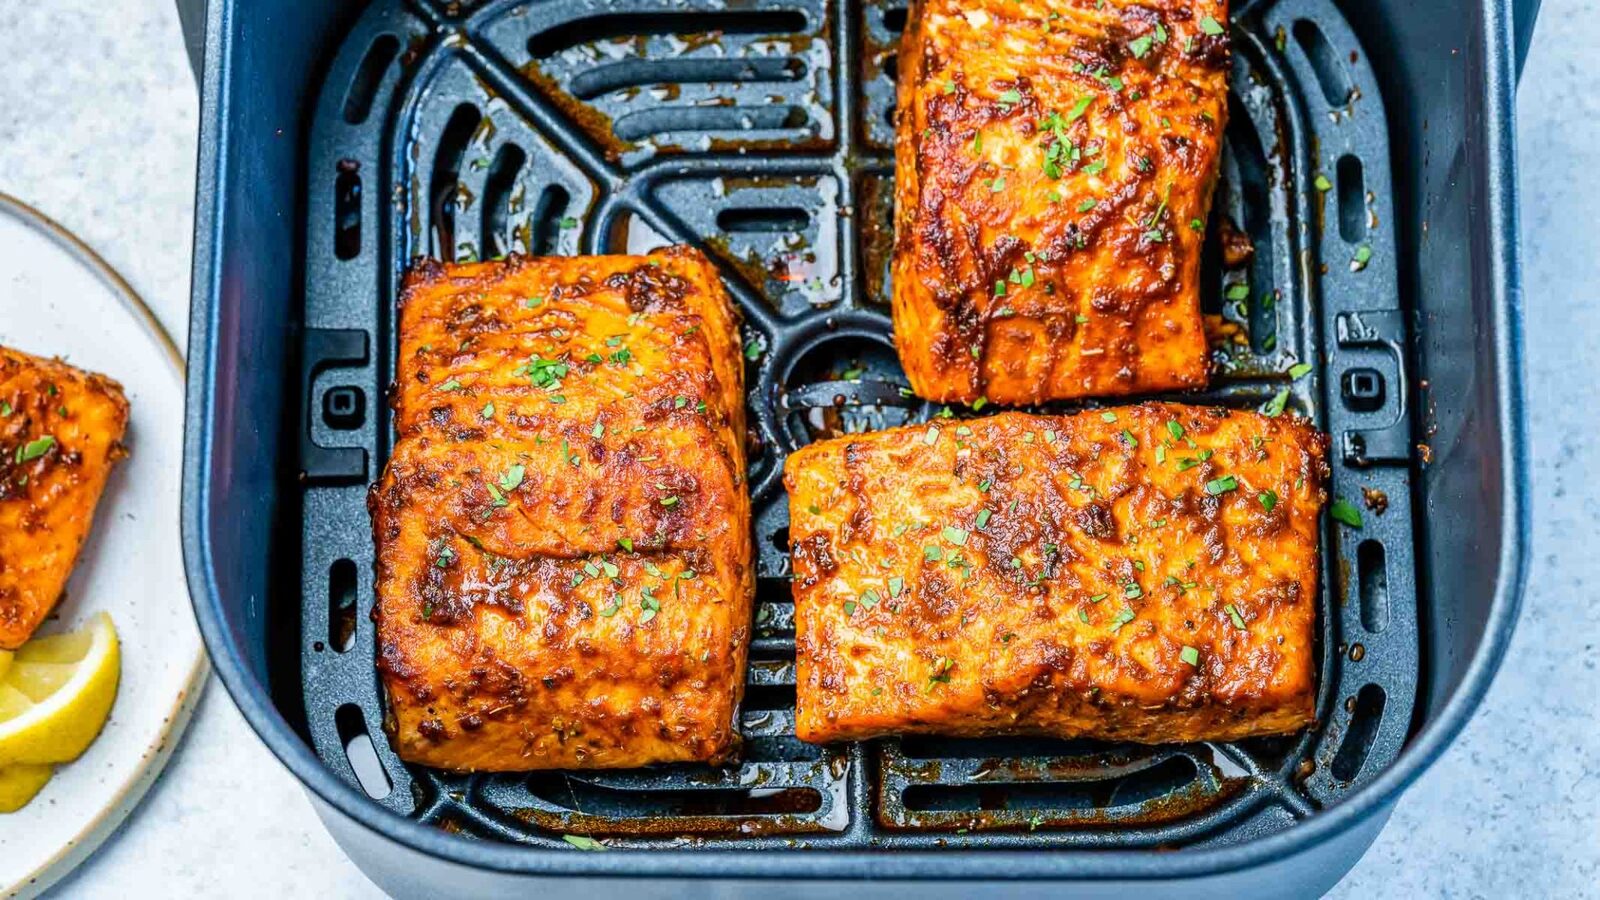 How Long Should I Cook Salmon In The Air Fryer